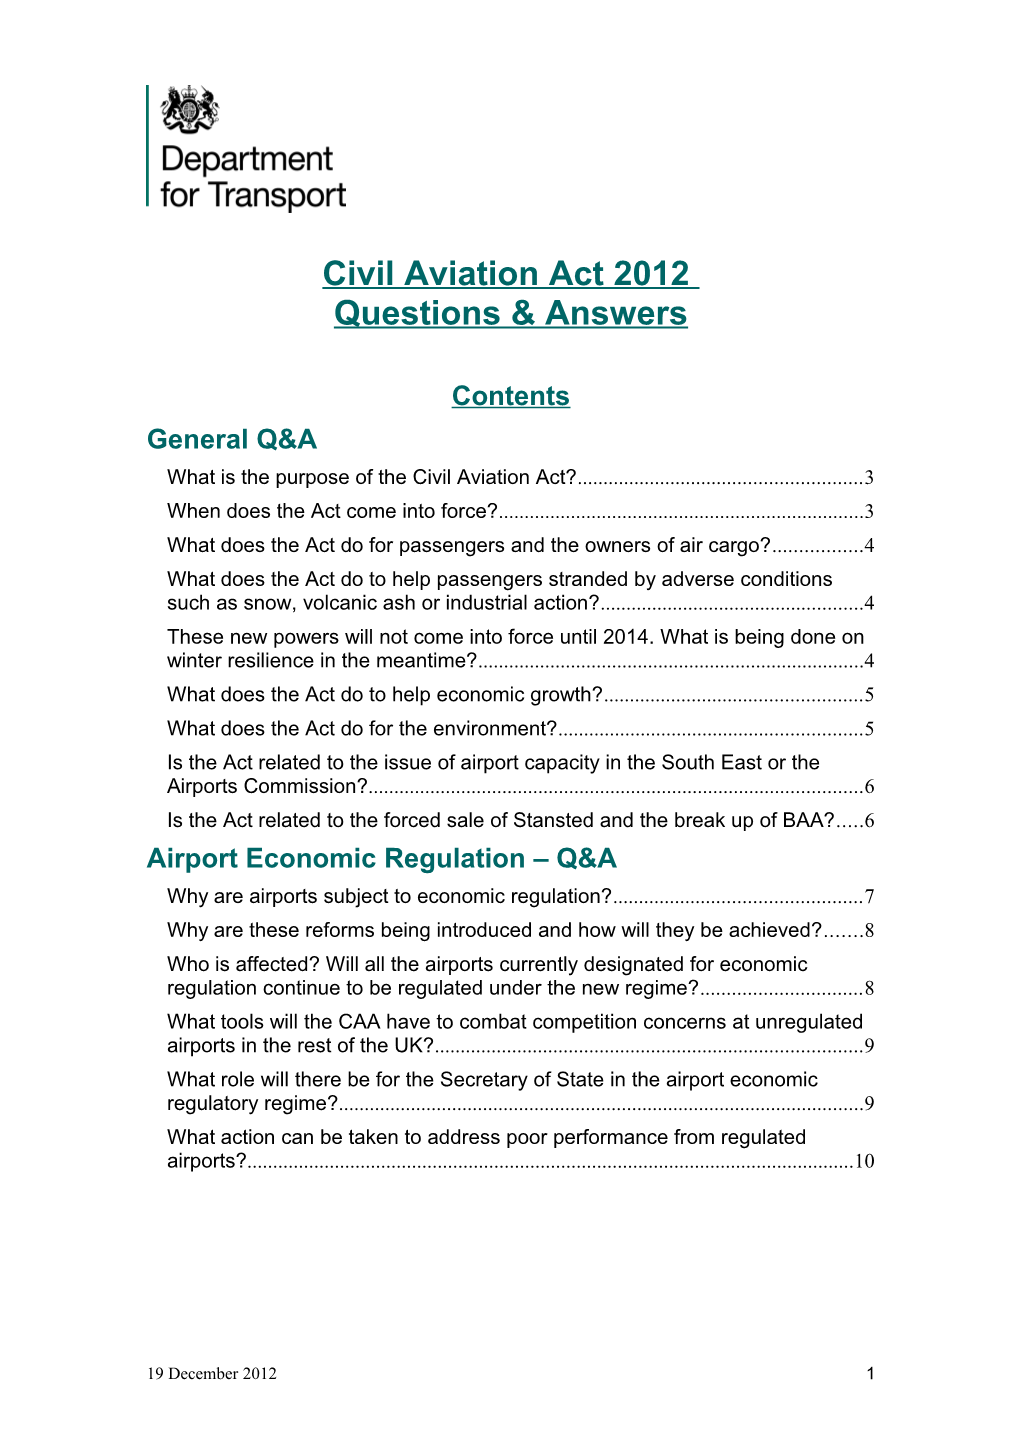 Civil Aviation Act 2012: Questions and Answers